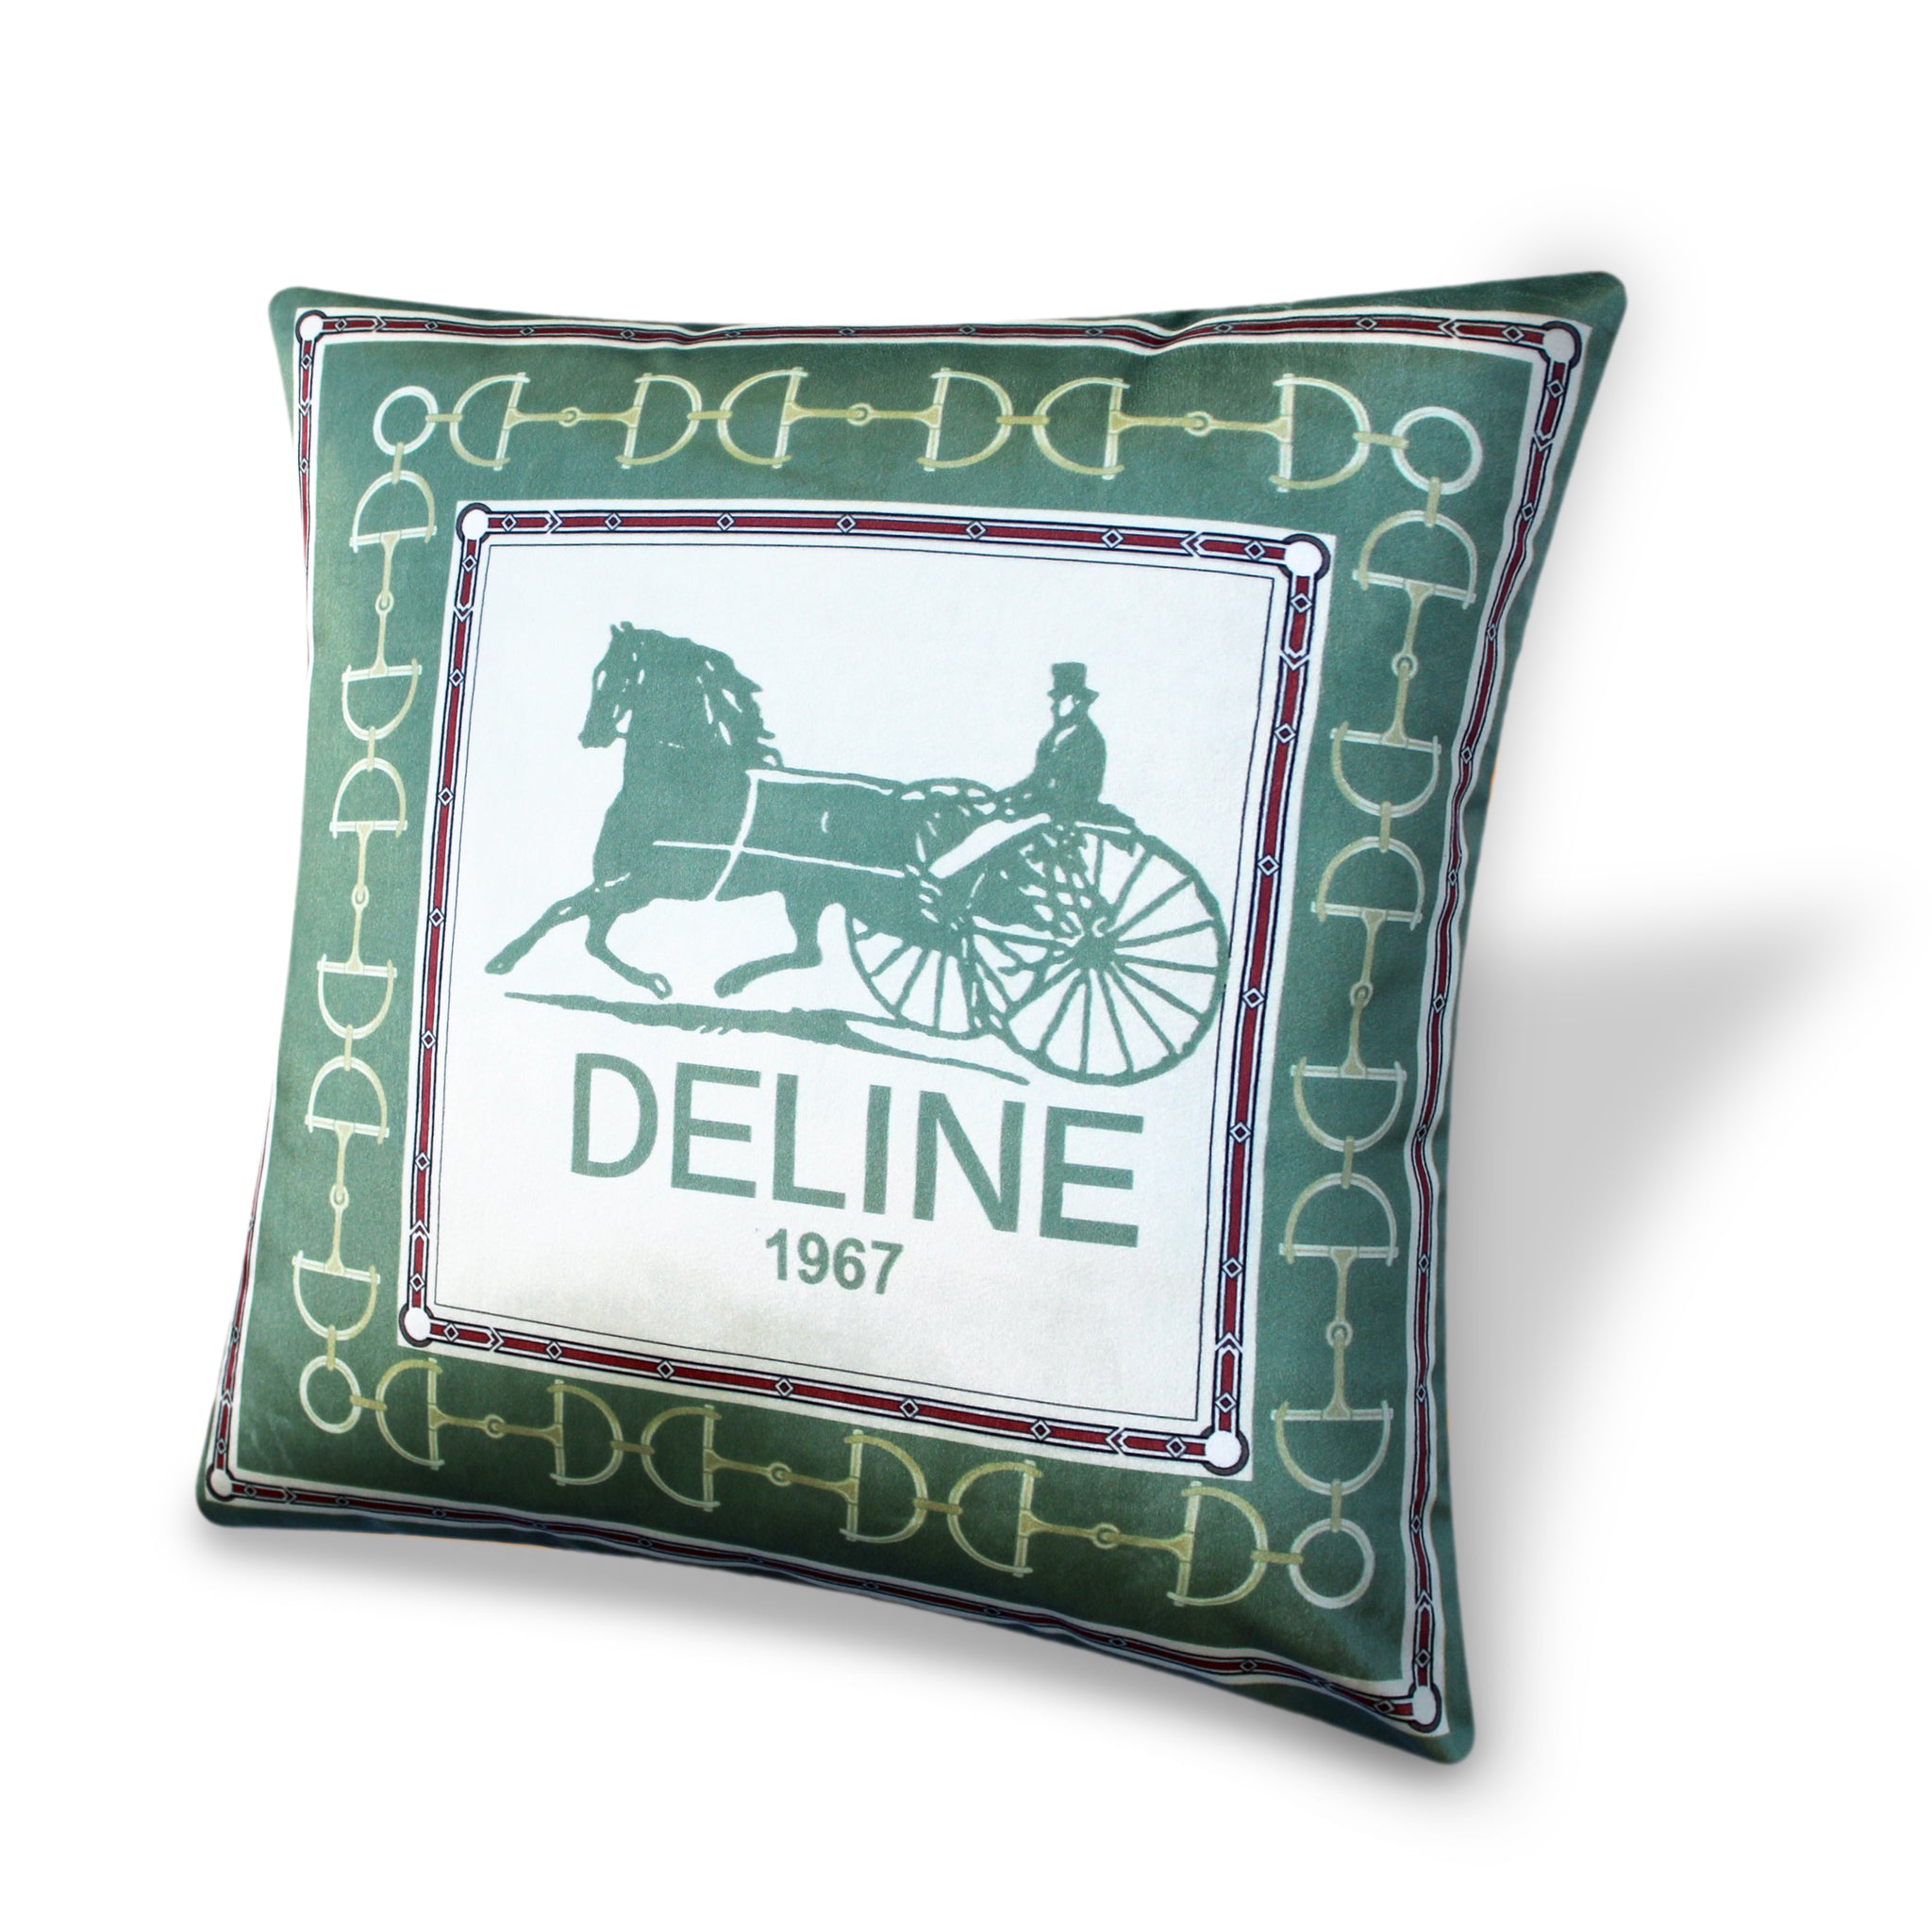 Green Velvet Cushion Cover, Hermes Inspired Horse Printed Decorative Pillow, Vintage Home Décor Throw Pillow Cover,  45 x 45 CM